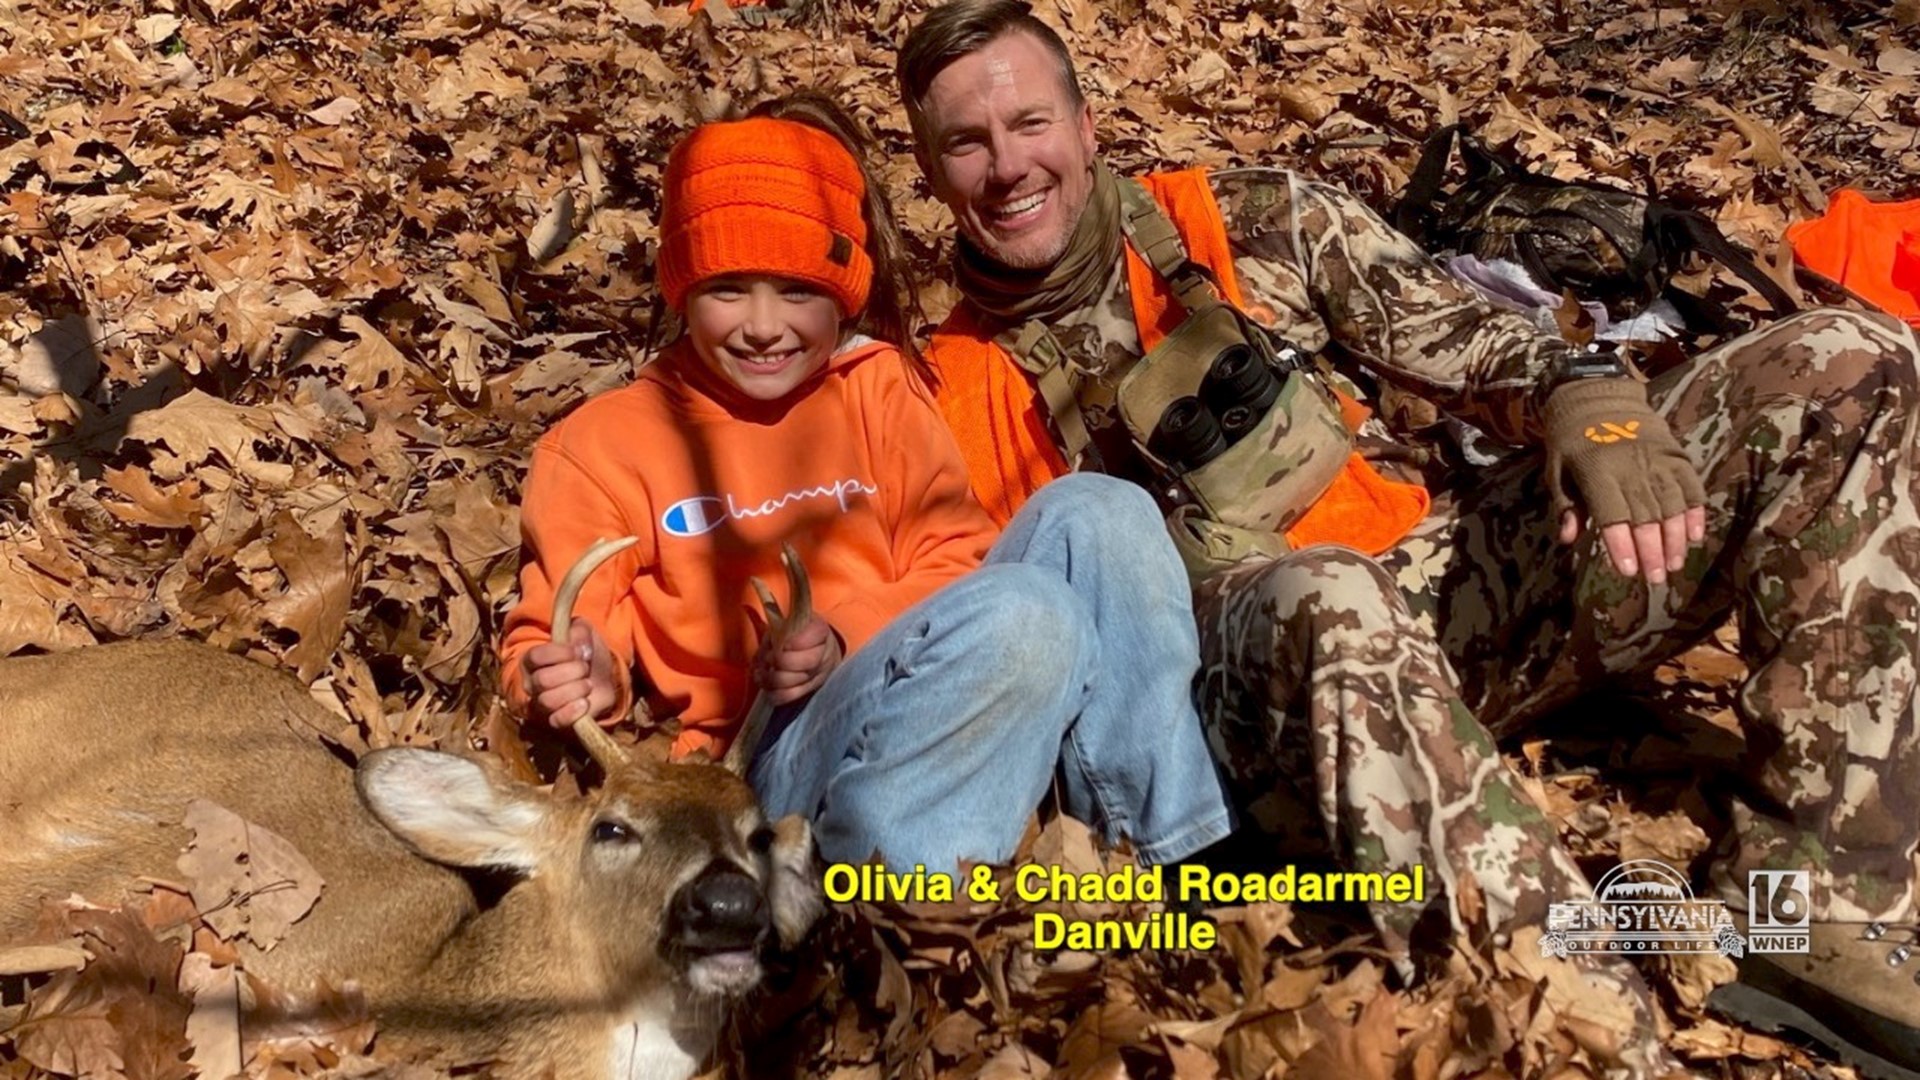 Take a look at some viewer photos of their first deer.